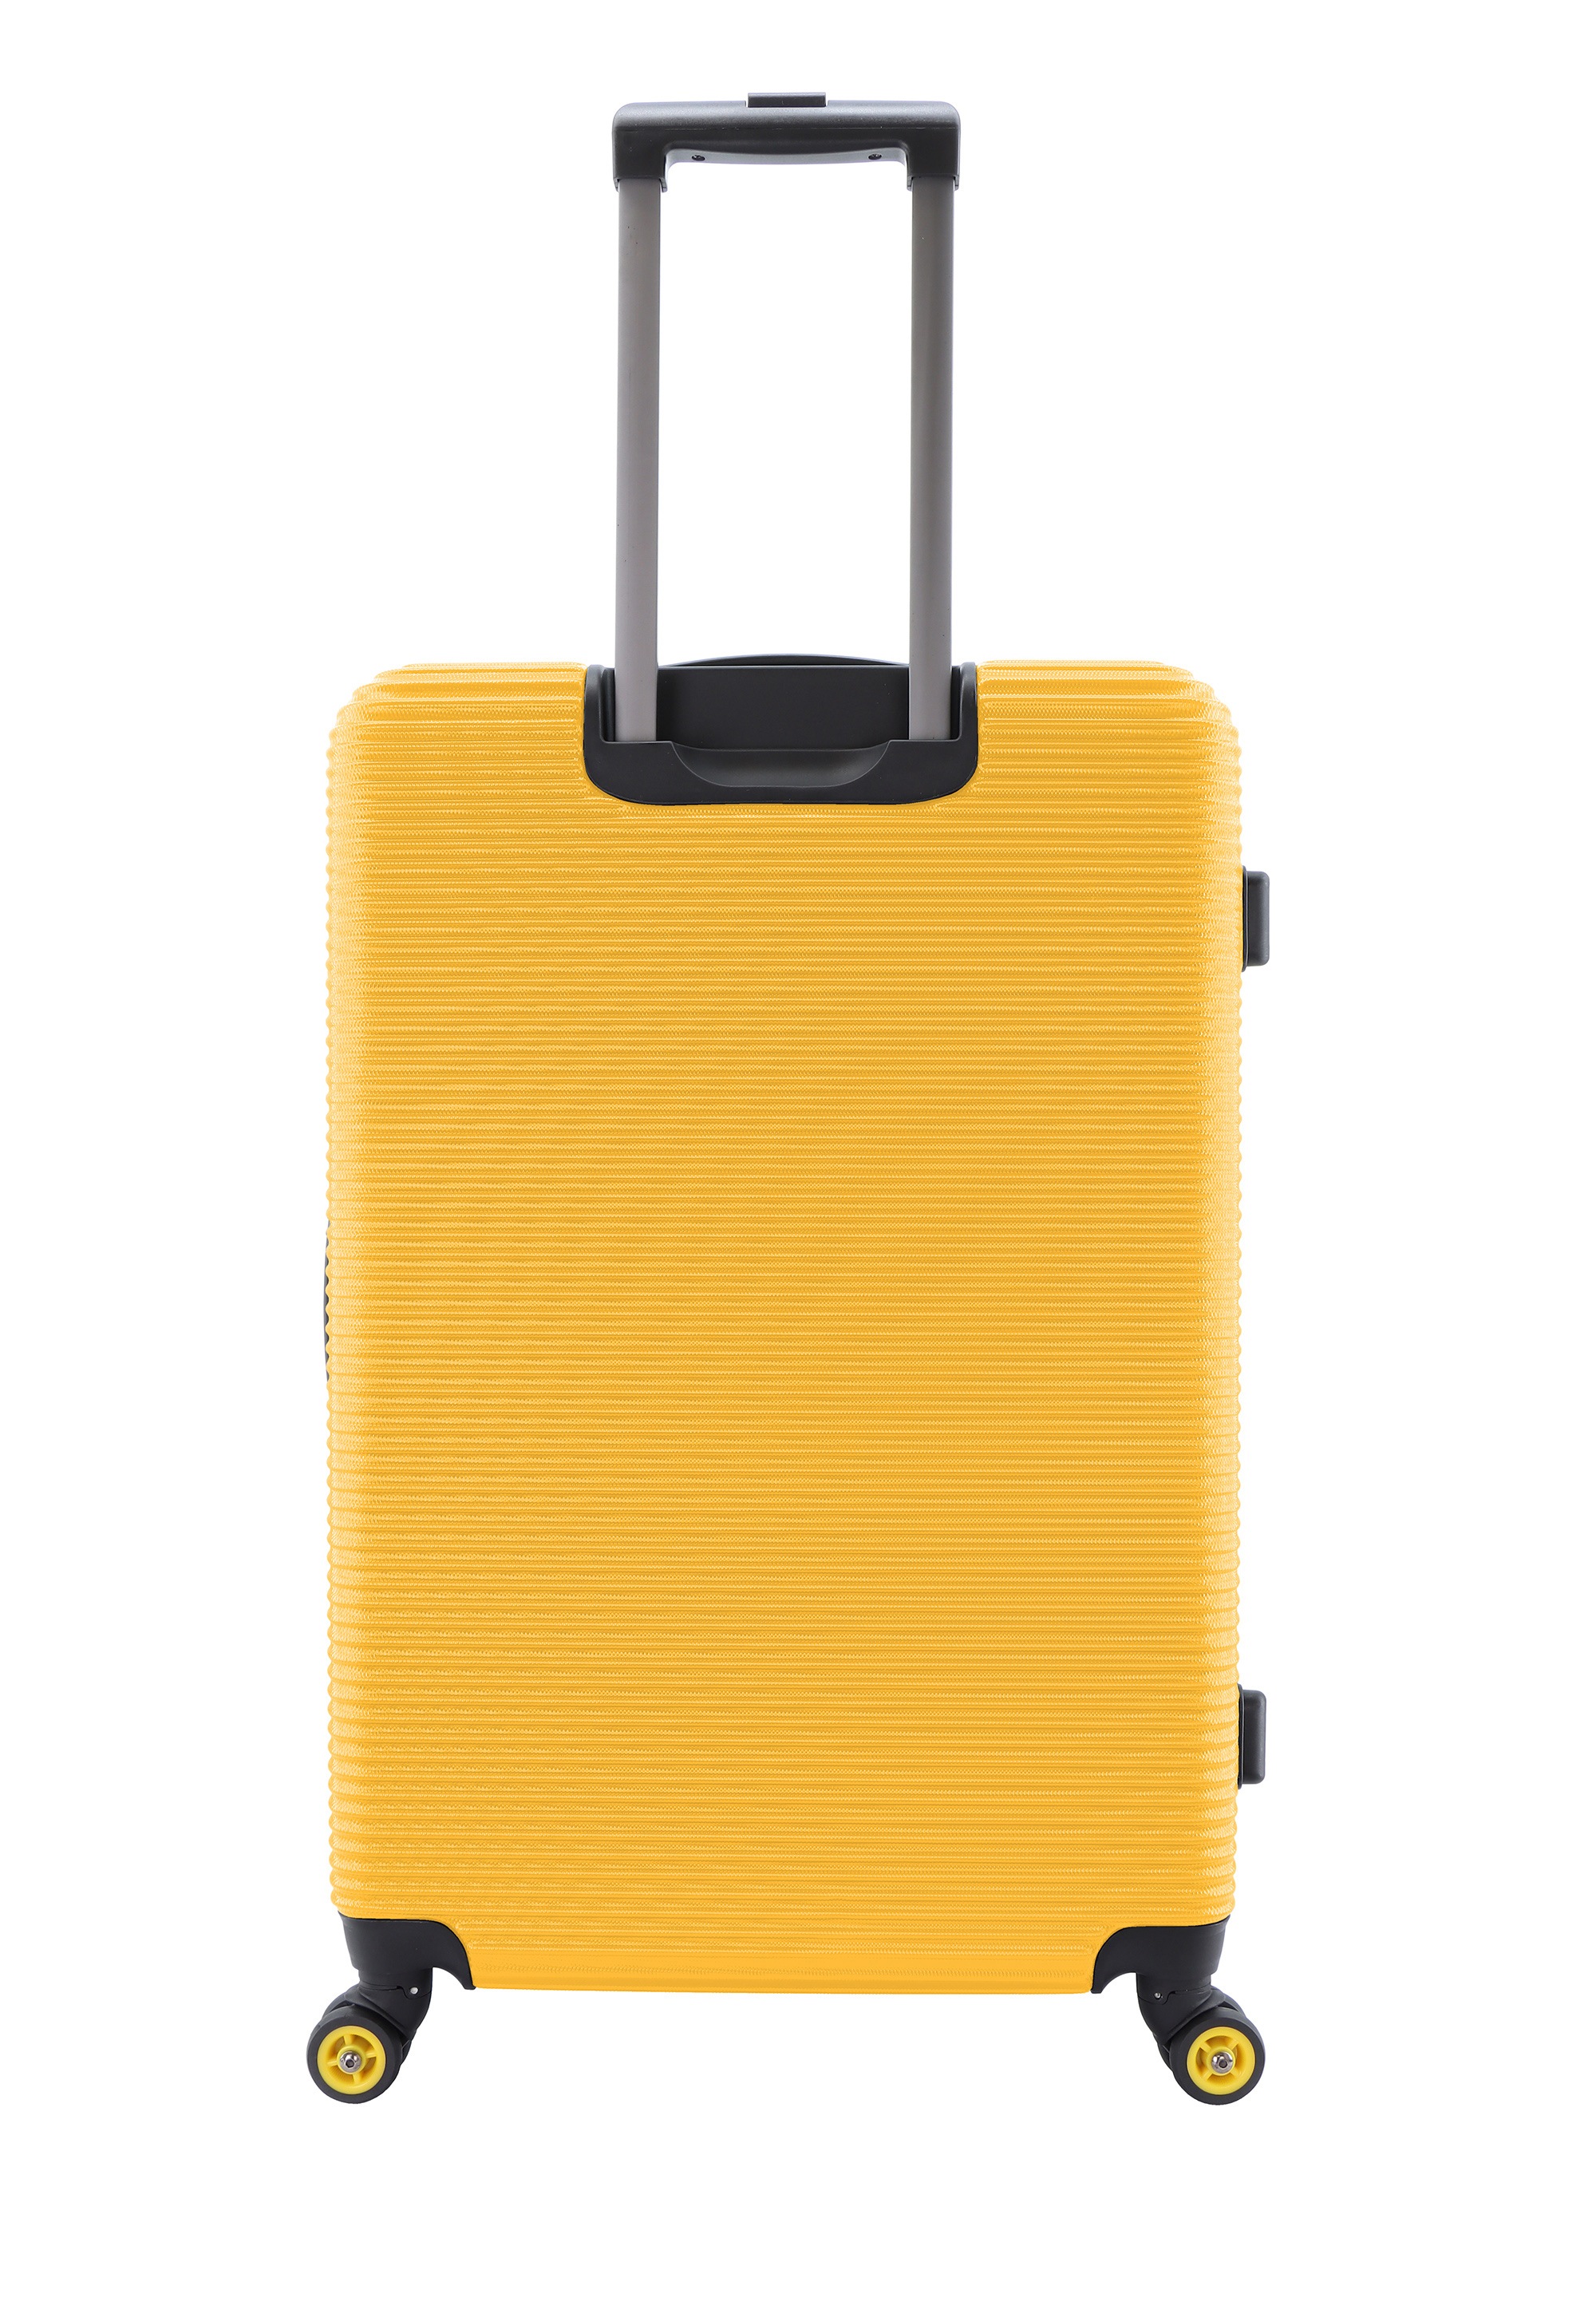 NATIONAL GEOGRAPHIC Koffer »Abroad«, mit integriertem Aluminium-Trolley-System